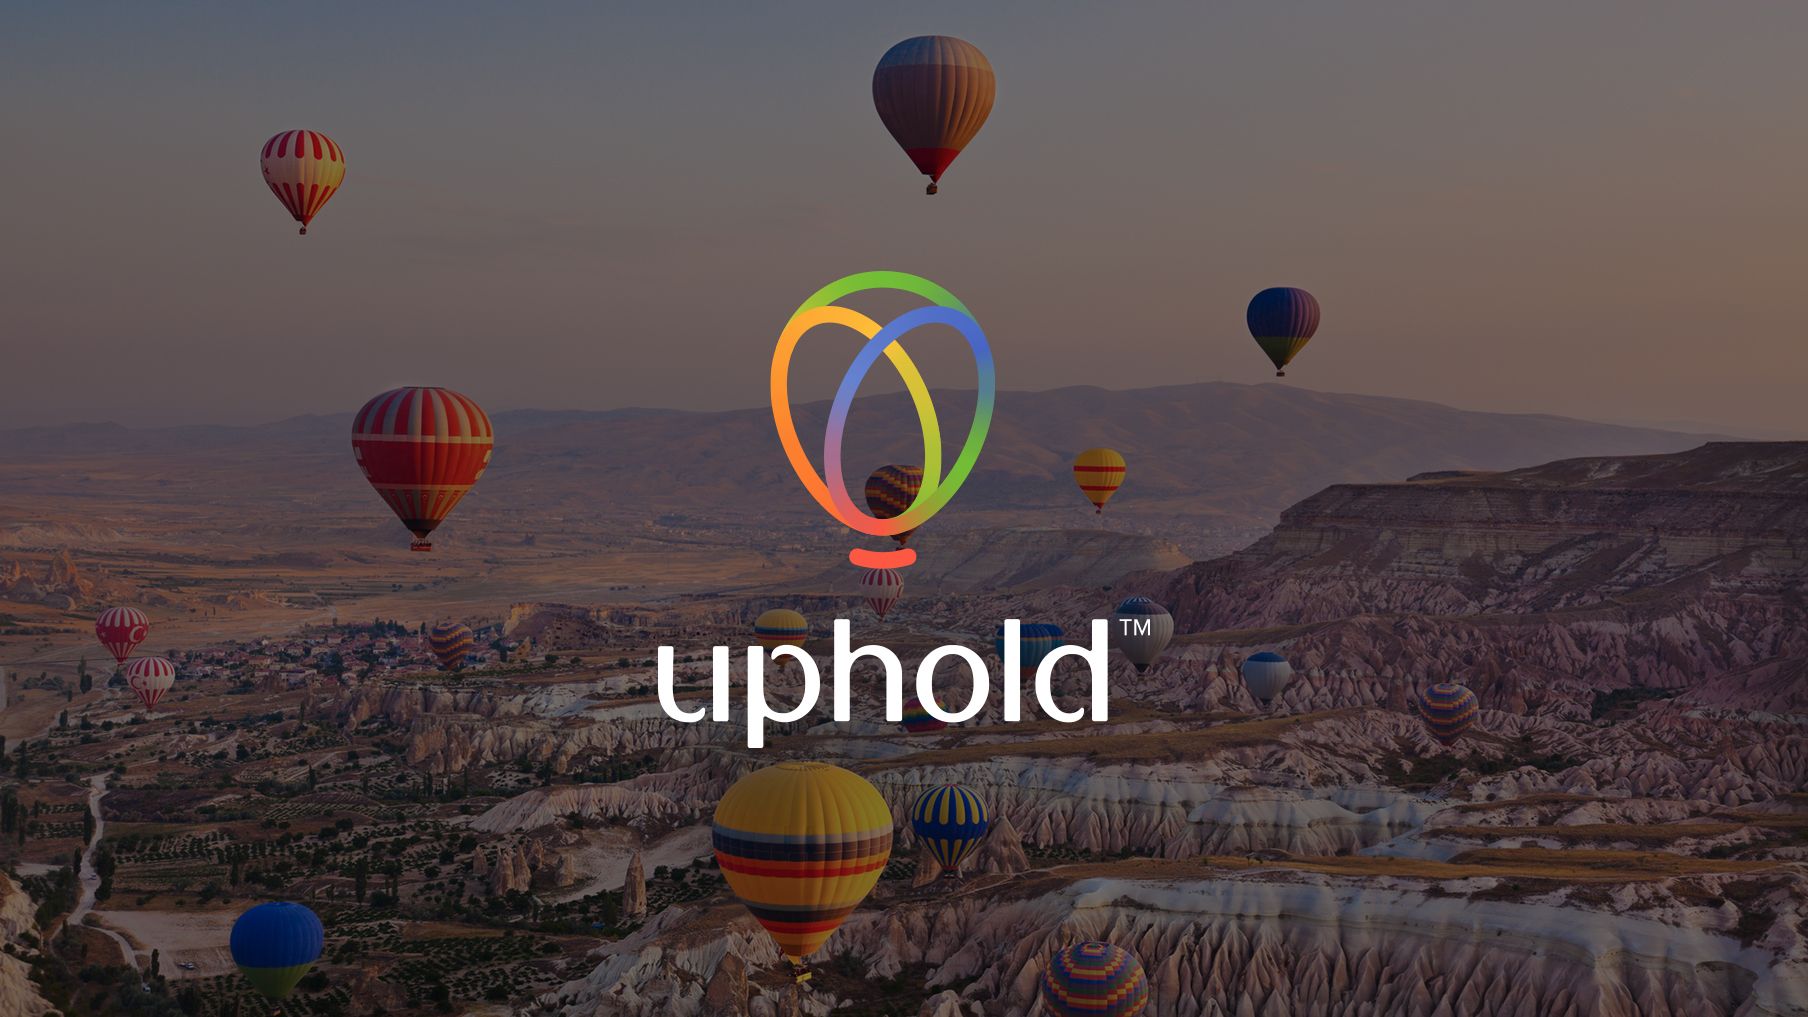 Uphold. Cryptocurrency Interledger